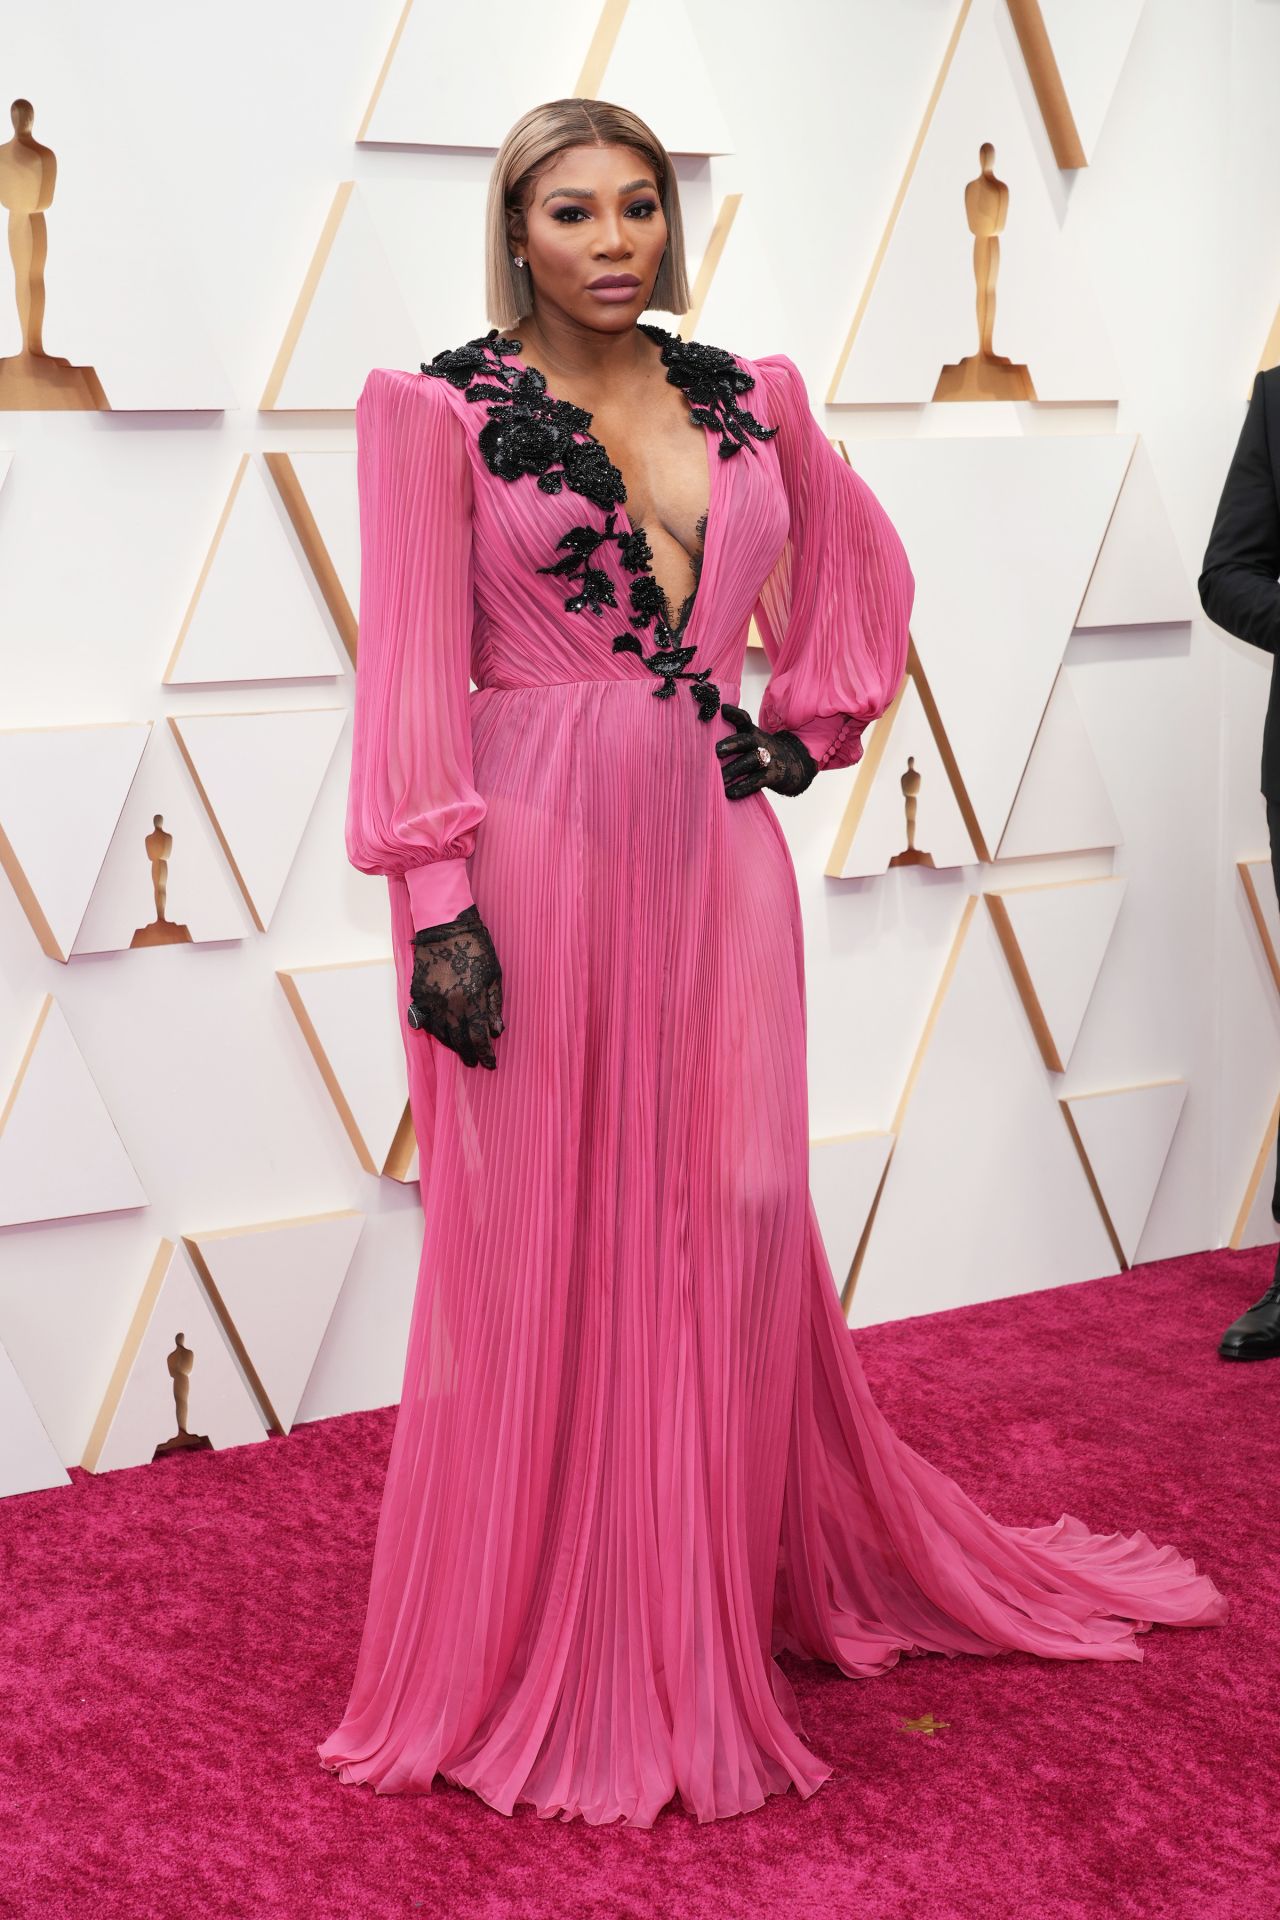 At the 2022 Oscars, Williams arrived in an accordion-style Gucci gown with lace detailing accentuating a plunging neckline.